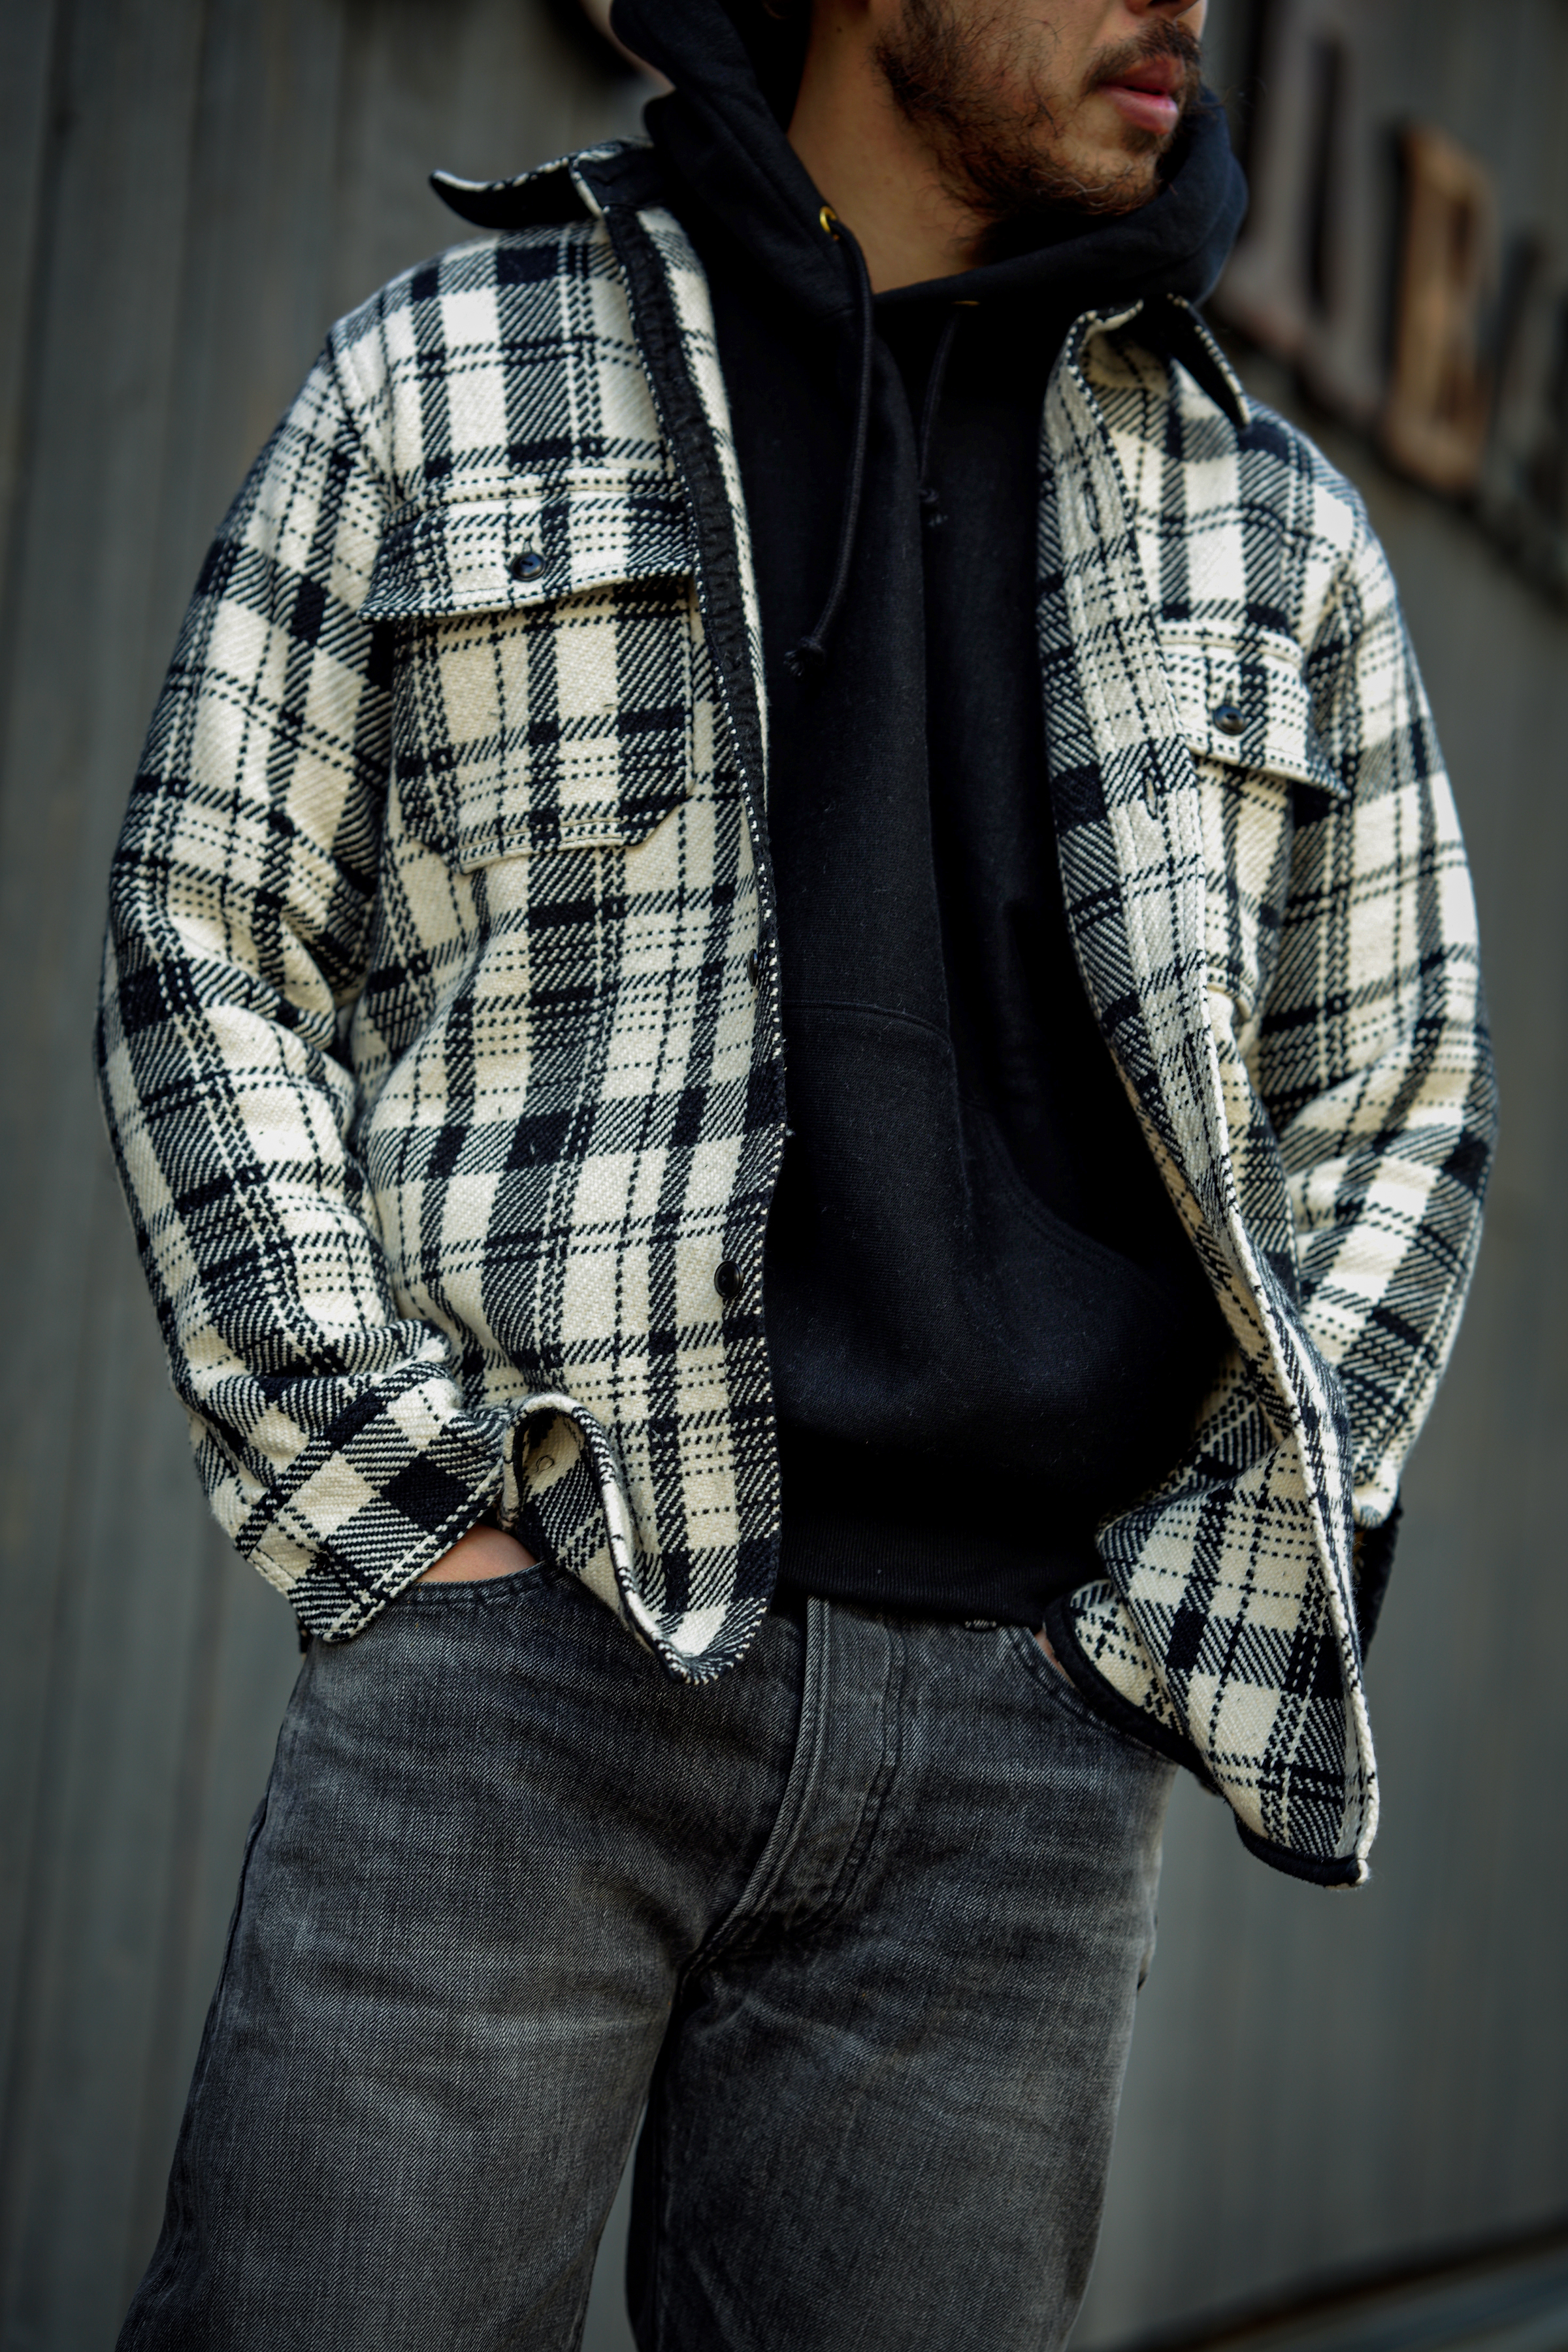 8HU HEAVY WEIGHT FLANNEL SHIRT – The Real McCoy's